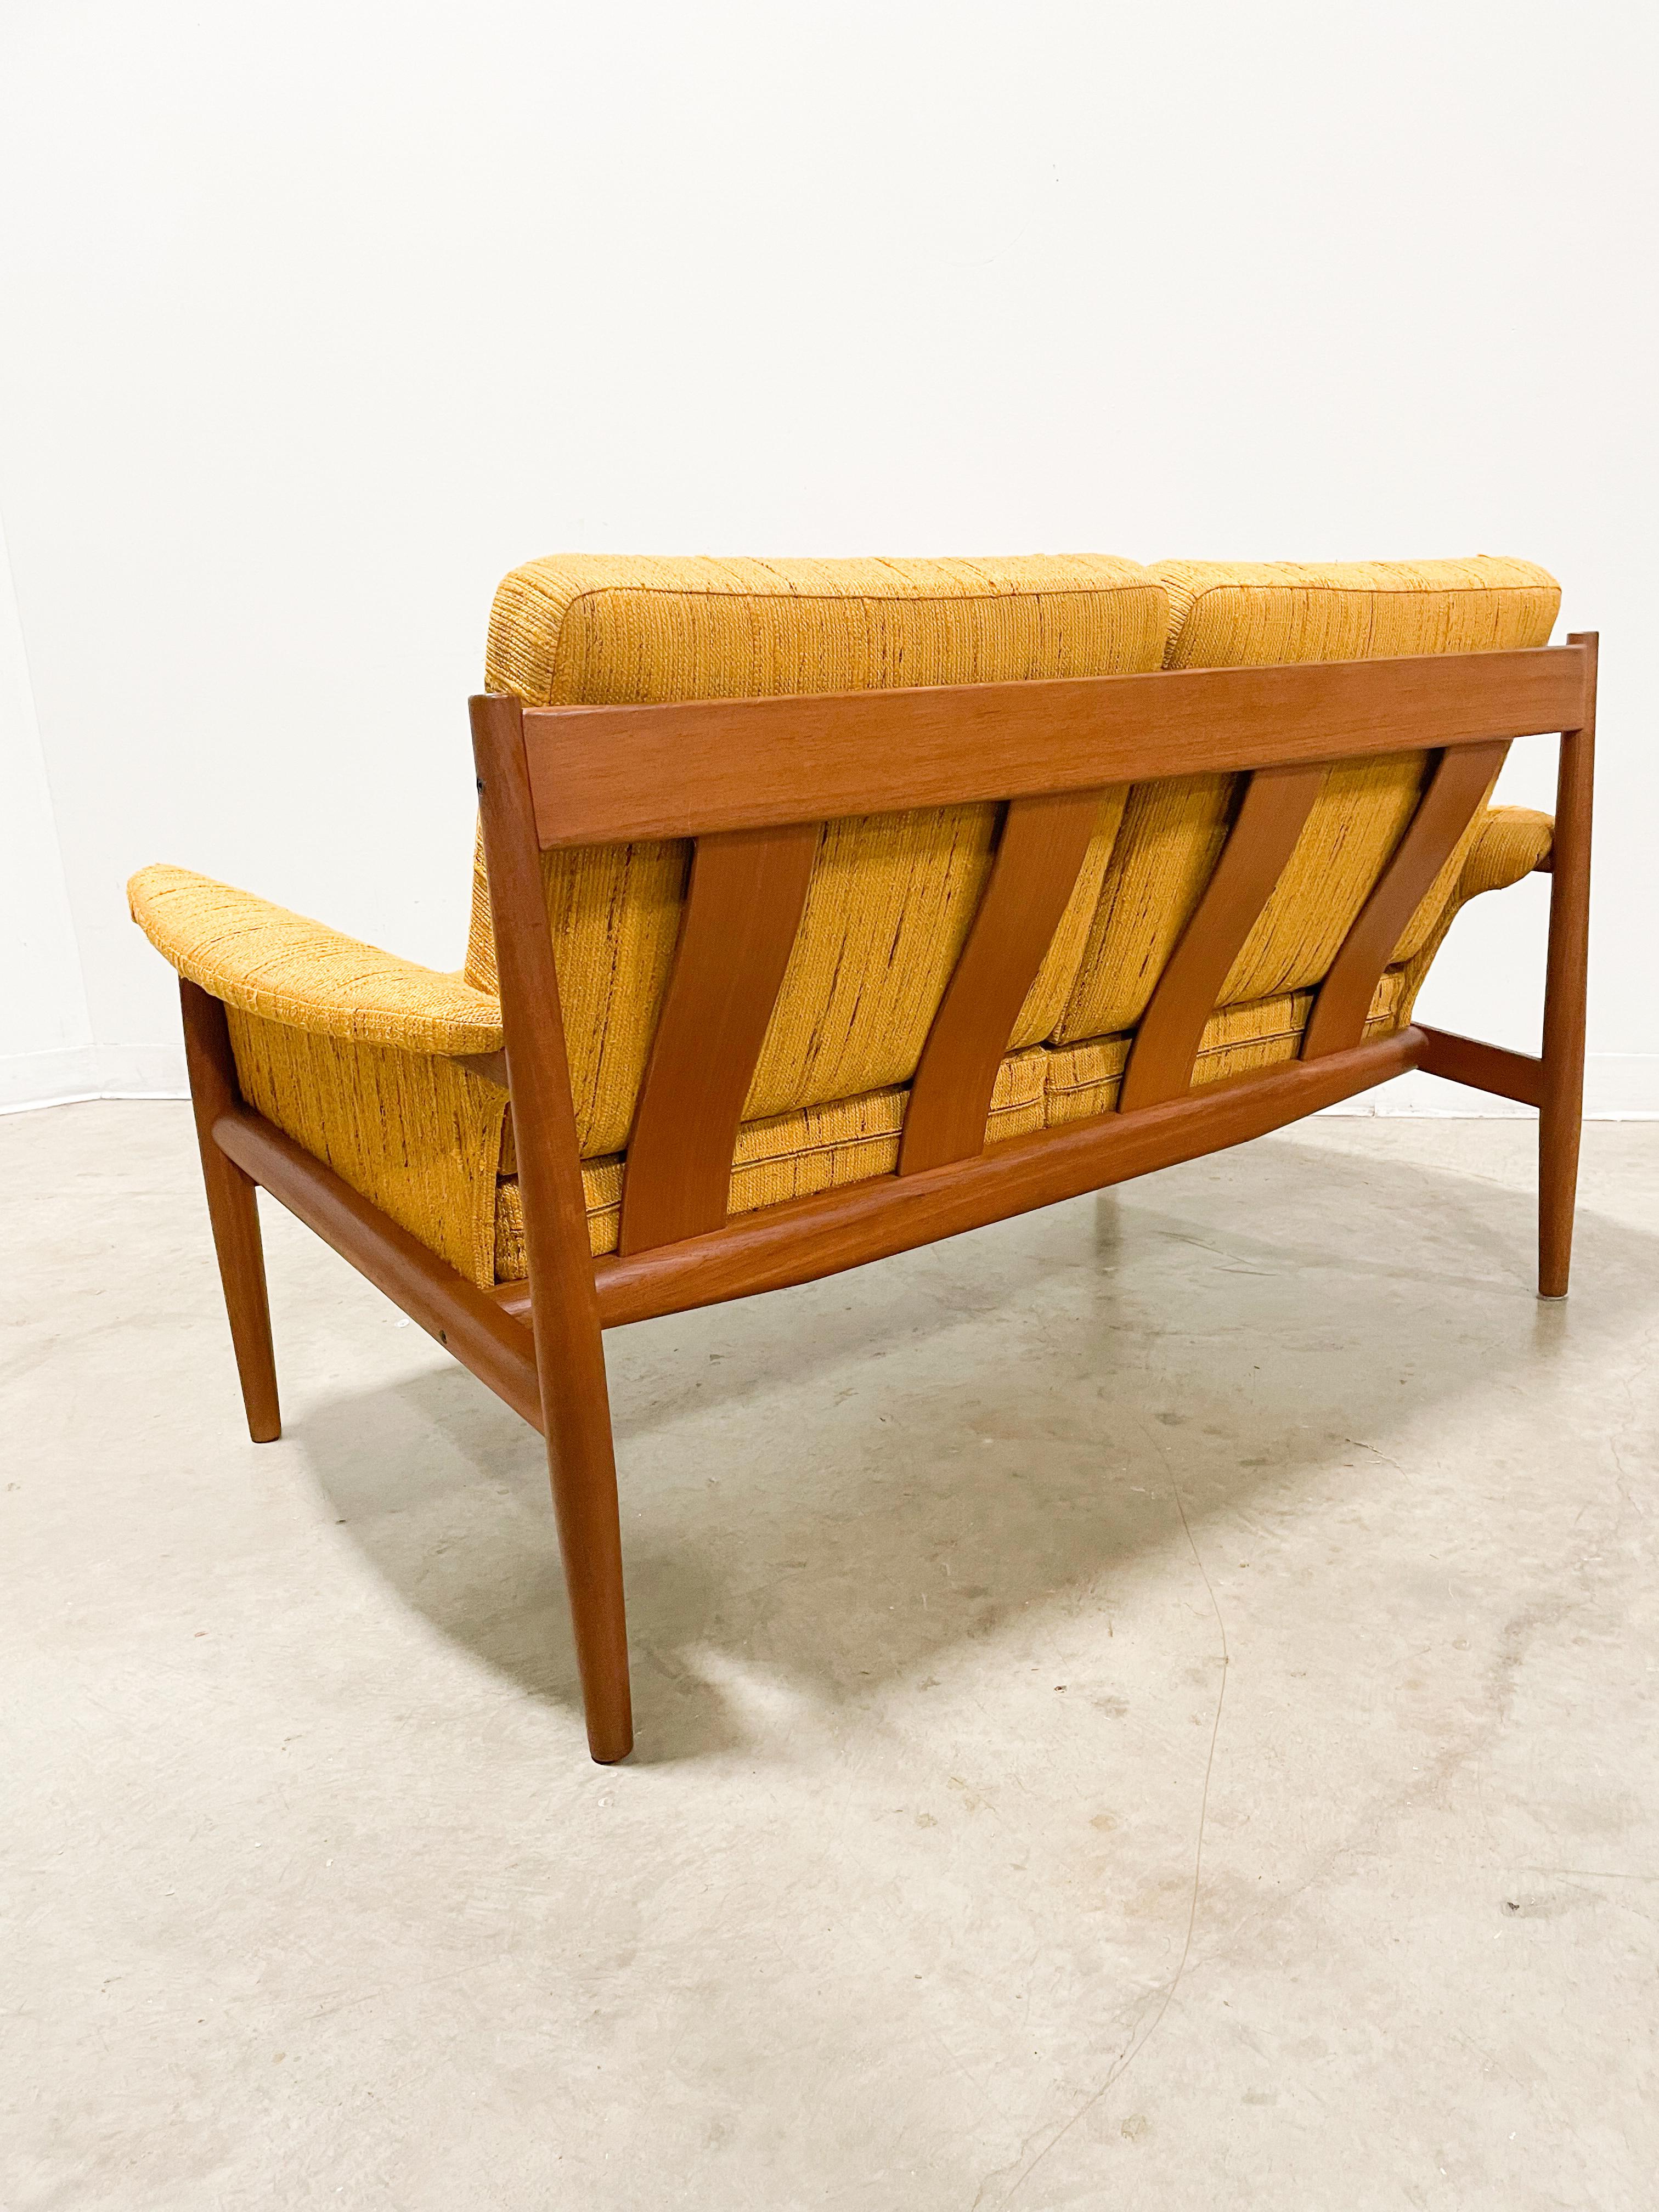 This beautiful love seat with original fabric and sprung cushions on a sculptural solid teak frame was designed by Grete Jalk and made in Denmark by France and Son. It is structurally solid, with minimal signs of wear, and remains very comfortable.